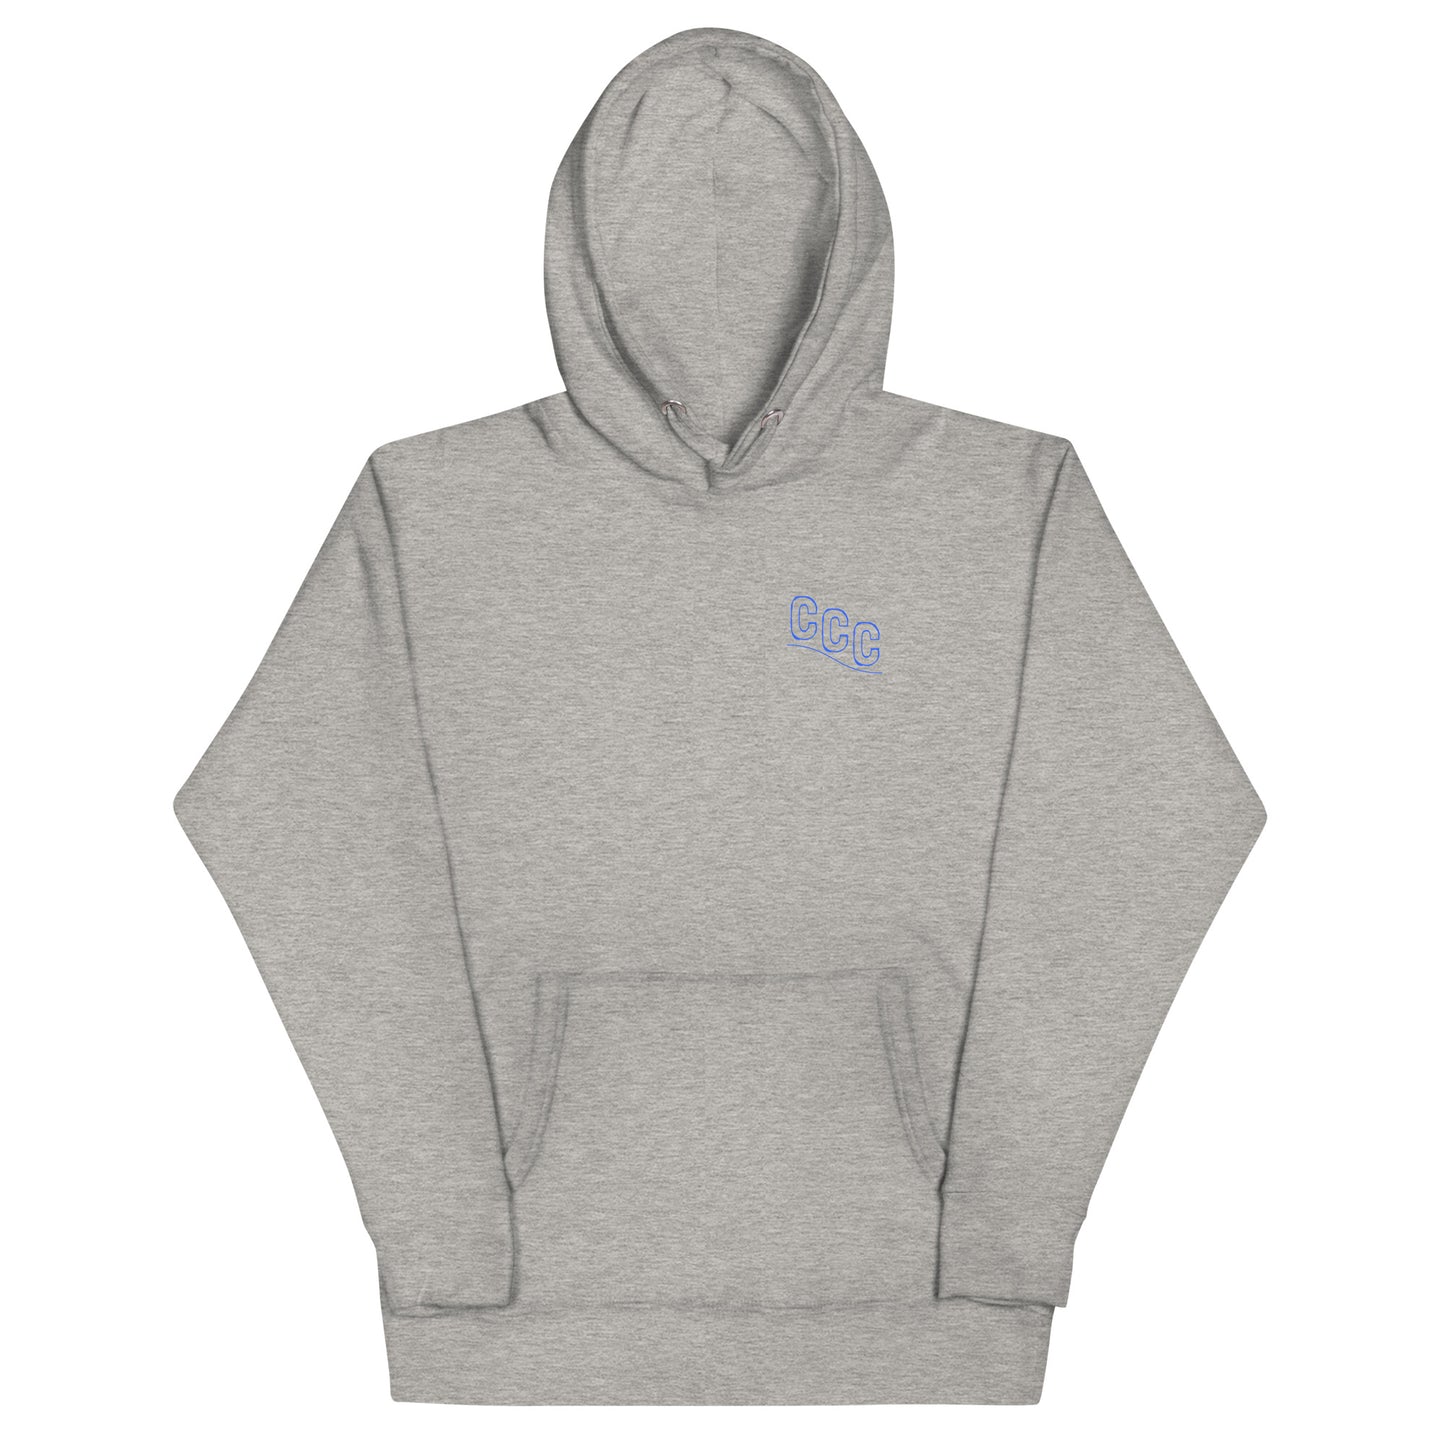 CCC Ace hoodie